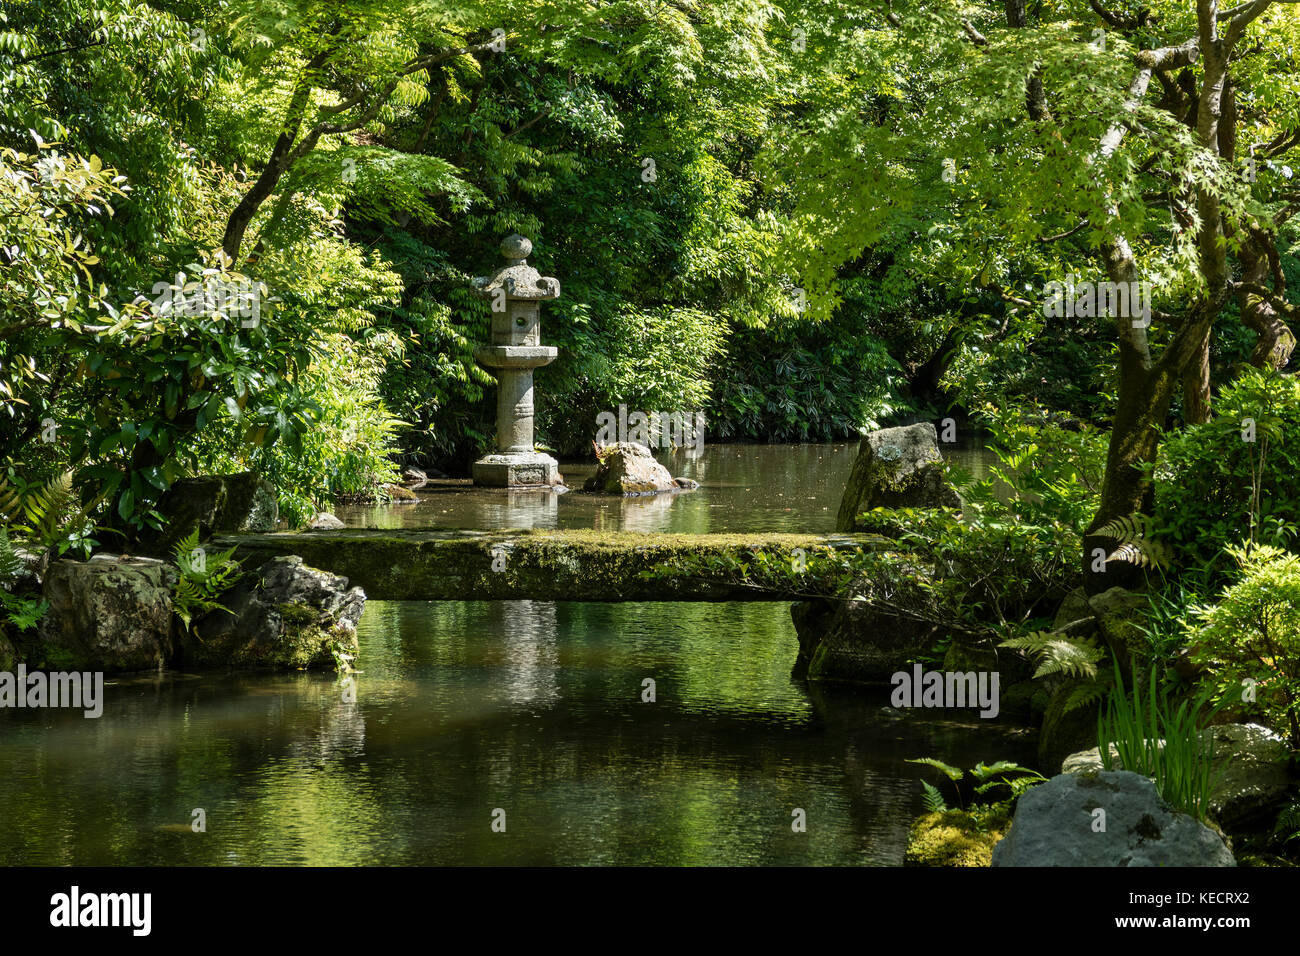 Kyoto, Japan - May 19, 2017: View of the Hojo Garden at Chion-in Buddhist temple with a traditional stone lantern in the pond Stock Photo